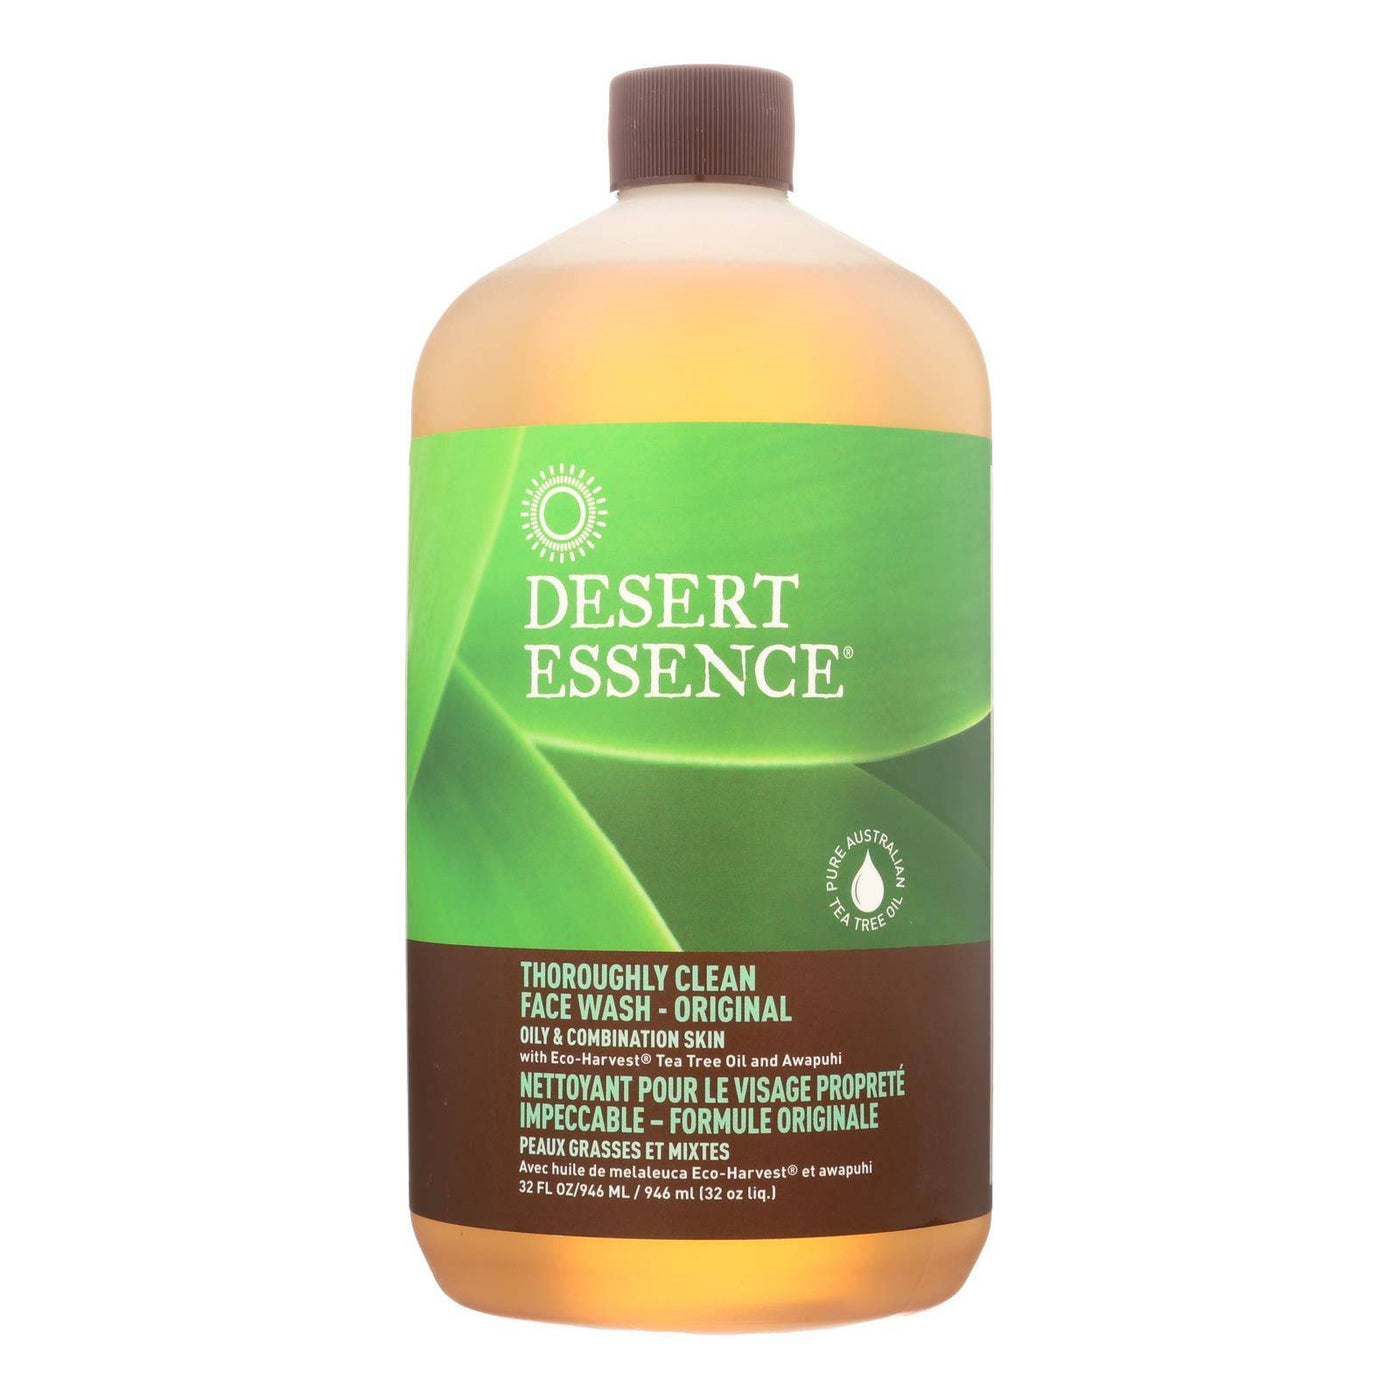 Desert Essence - Thoroughly Clean Face Wash - Original Oily And Combination Skin - 32 Fl Oz | OnlyNaturals.us